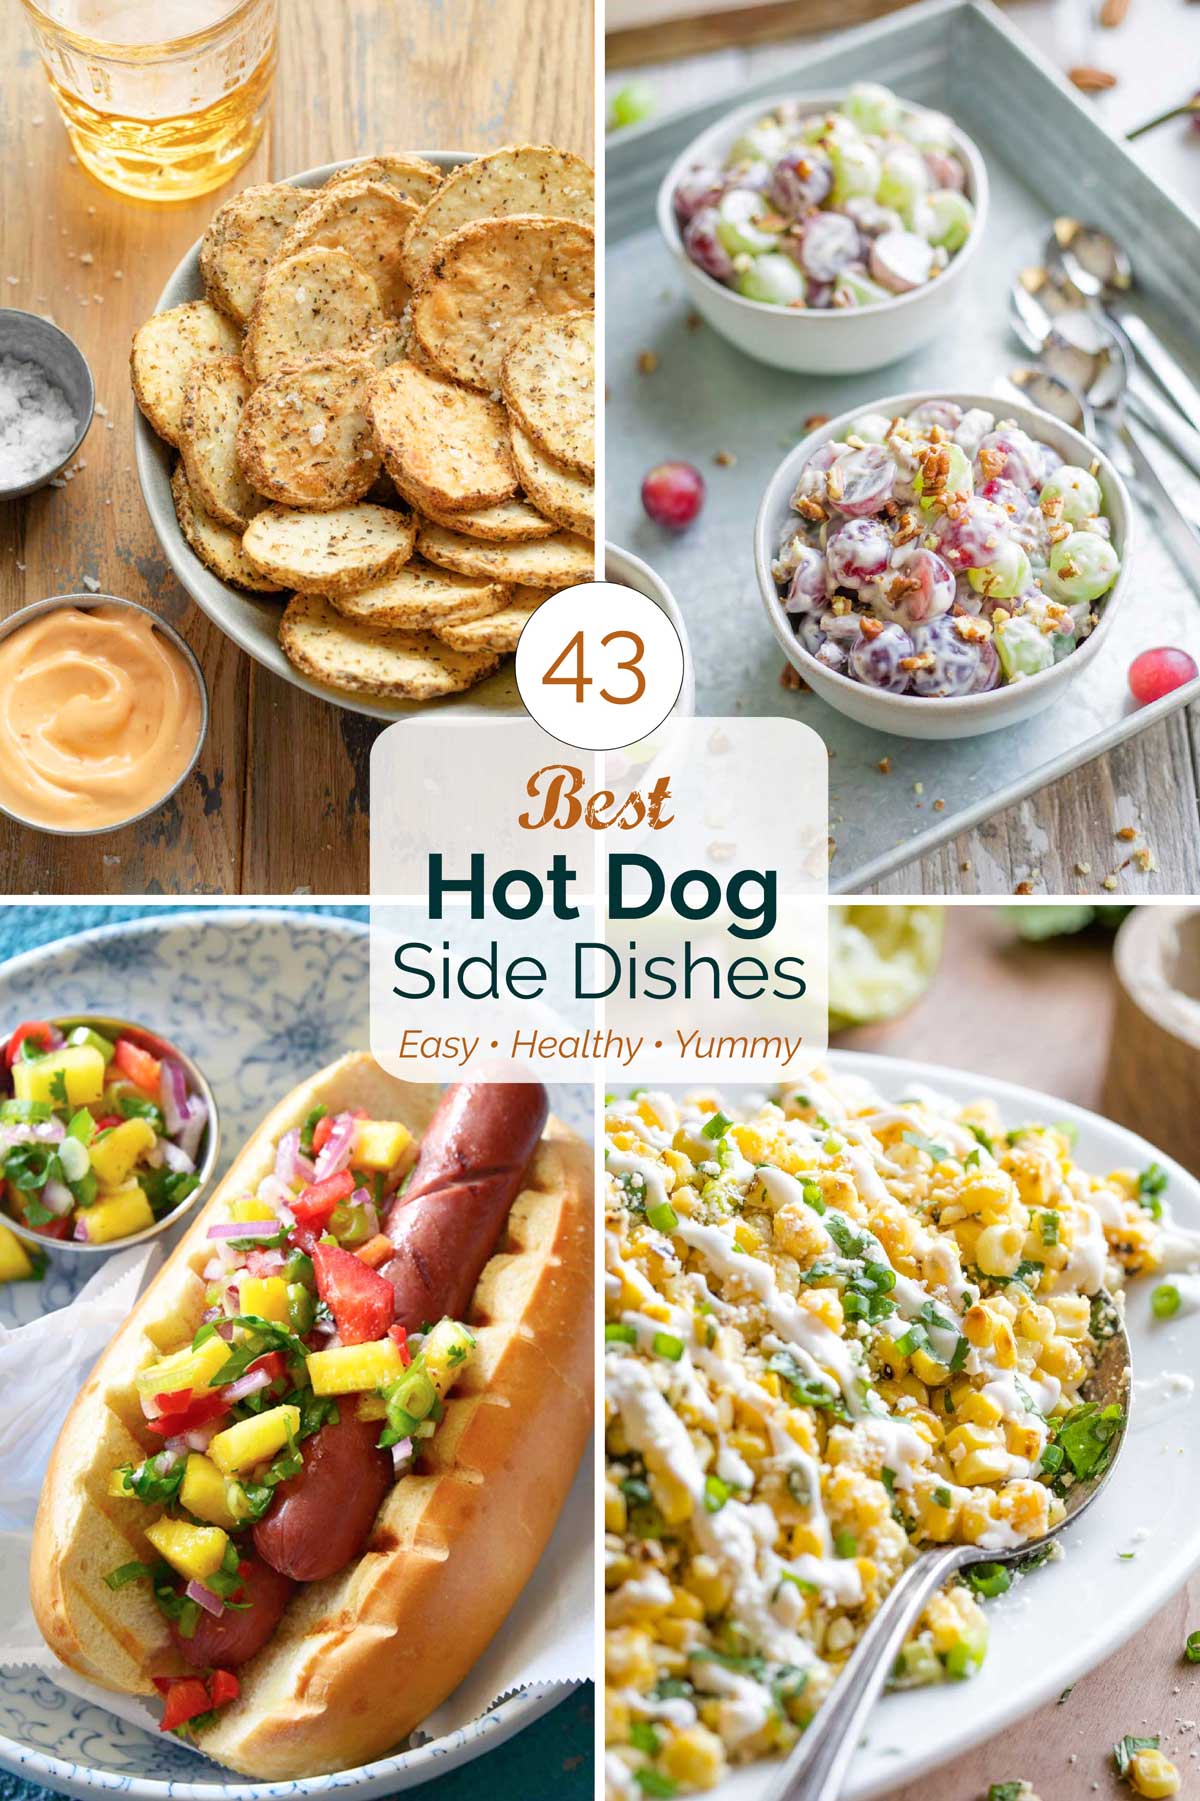 Collage of 4 recipe photos with text overlay "43 Best Hot Dog Side Dishes: Easy • Healthy • Yummy".